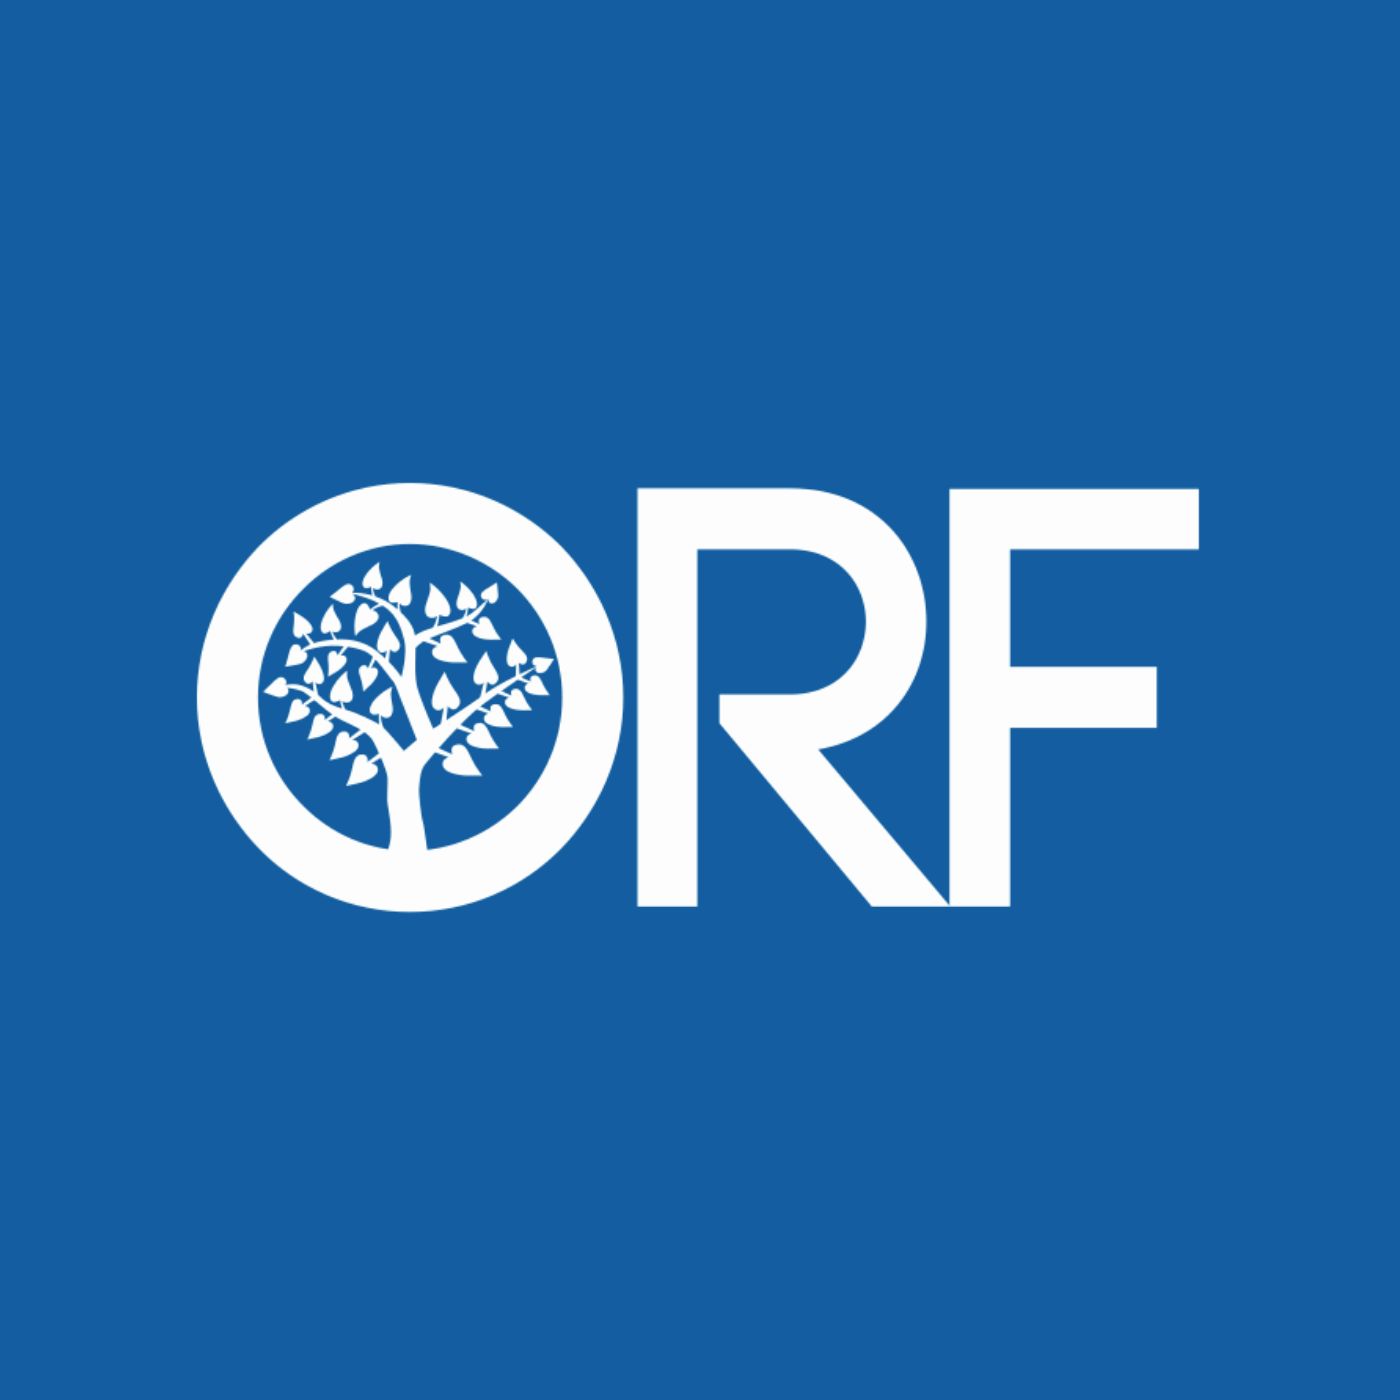 Observer Research Foundation